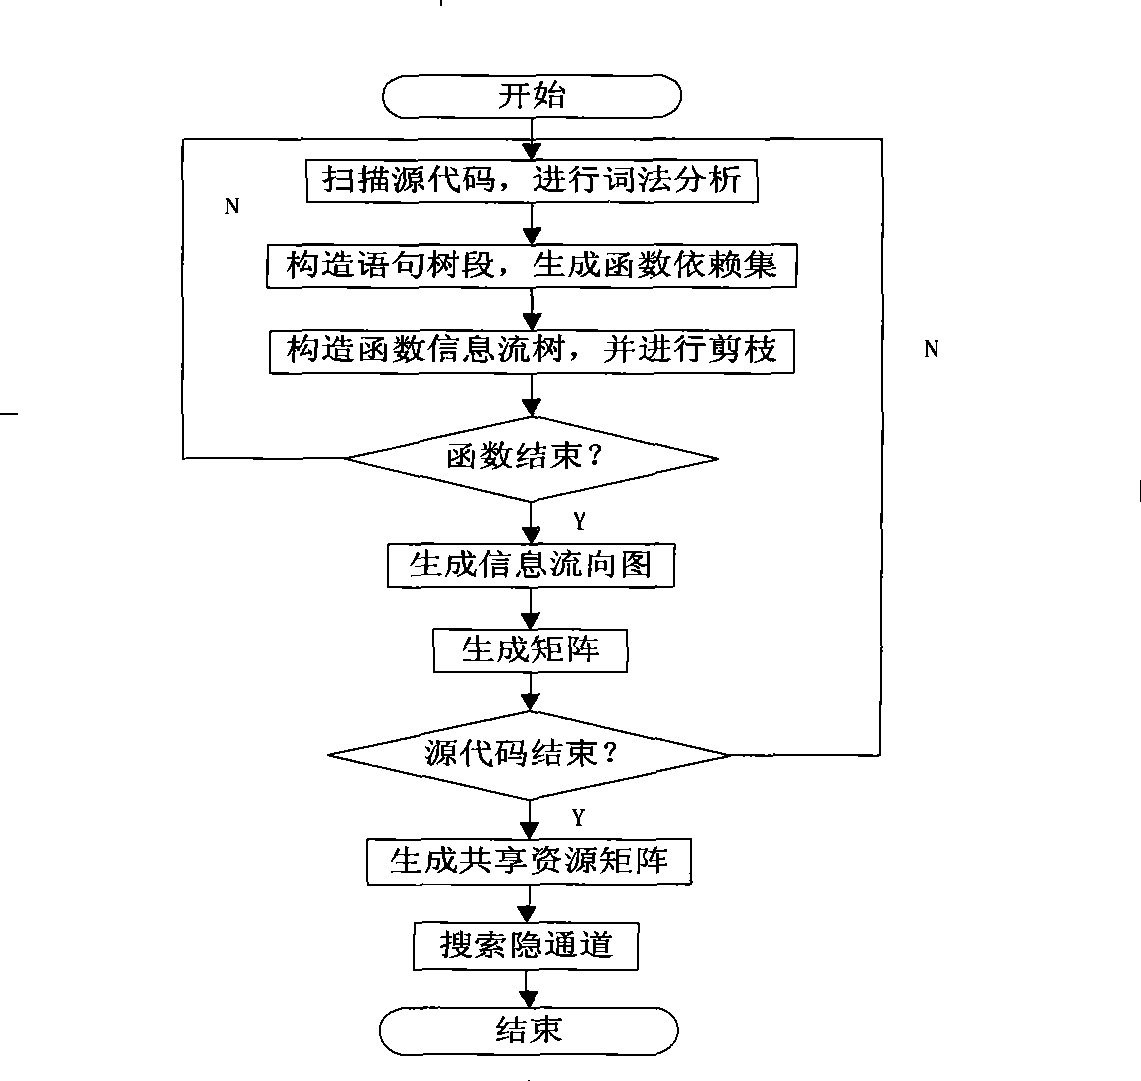 Information flow analysis method based on system source code searching concealed channel